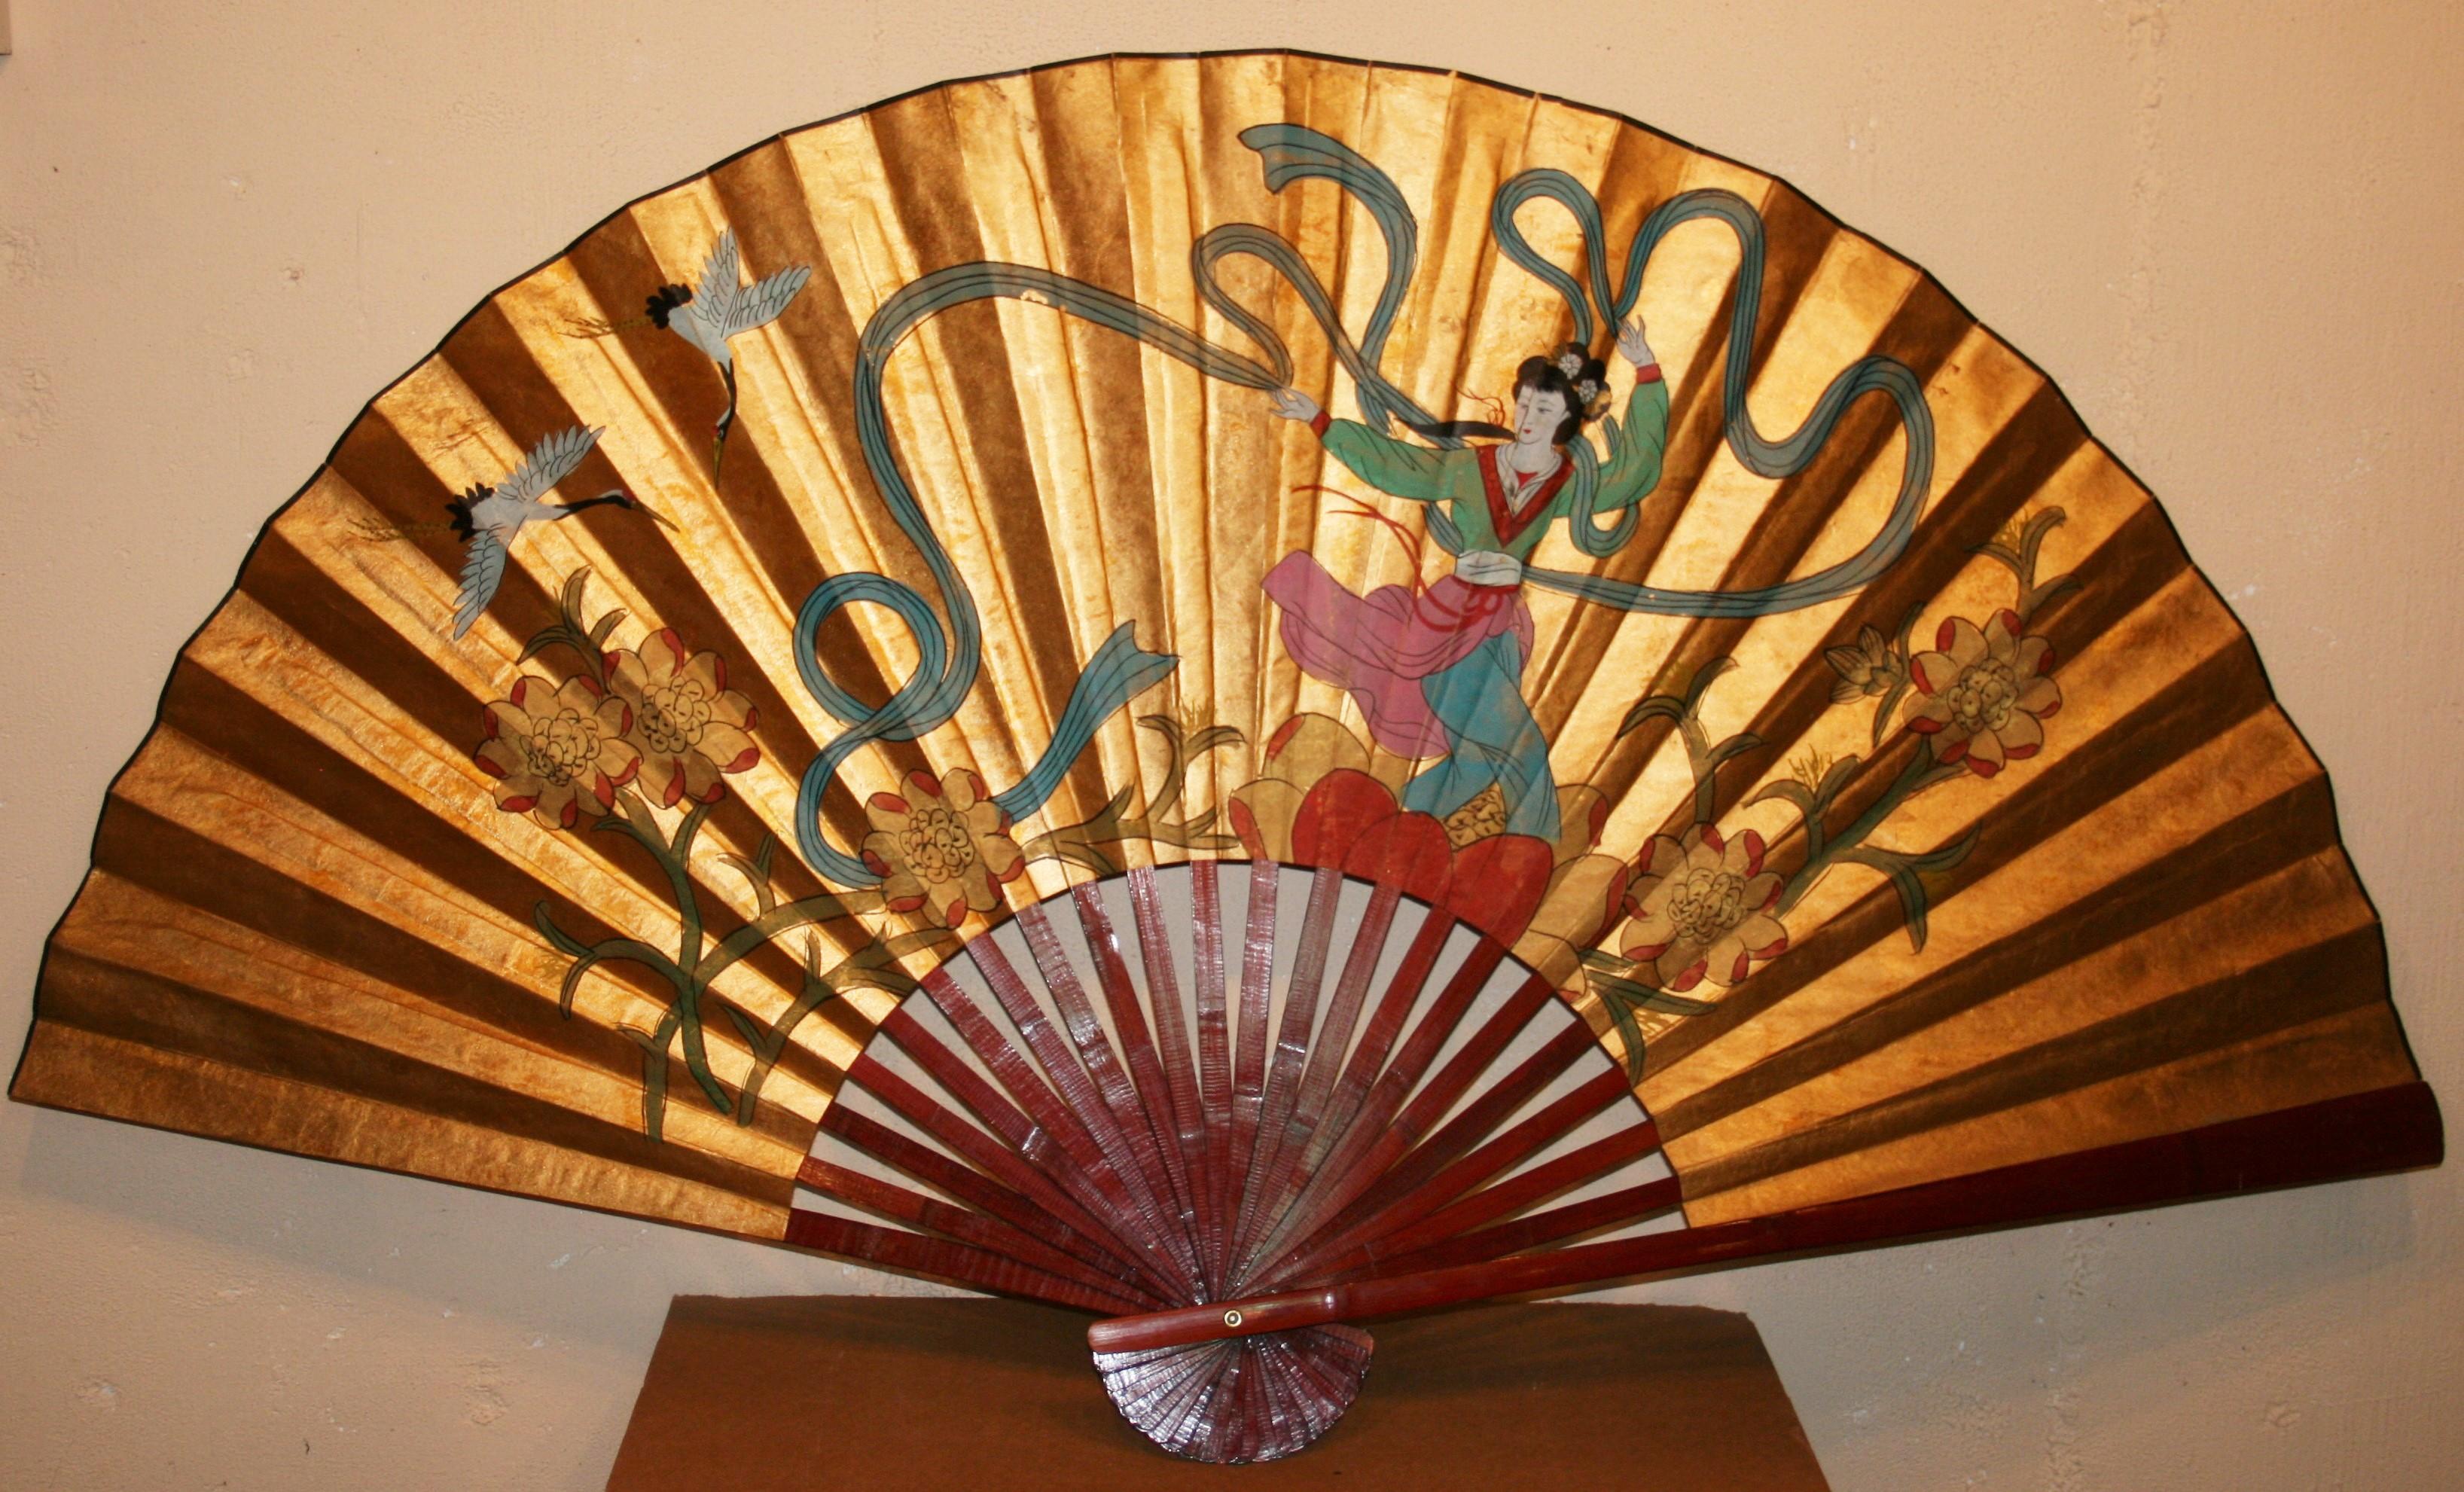 Monumental Chinese folding fan that is extra large when fully opened circa 1950's.
The colors are still incredibly vivid and the folding mechanism works.
Comes ready to hang on any wall with 2 hooks on back.